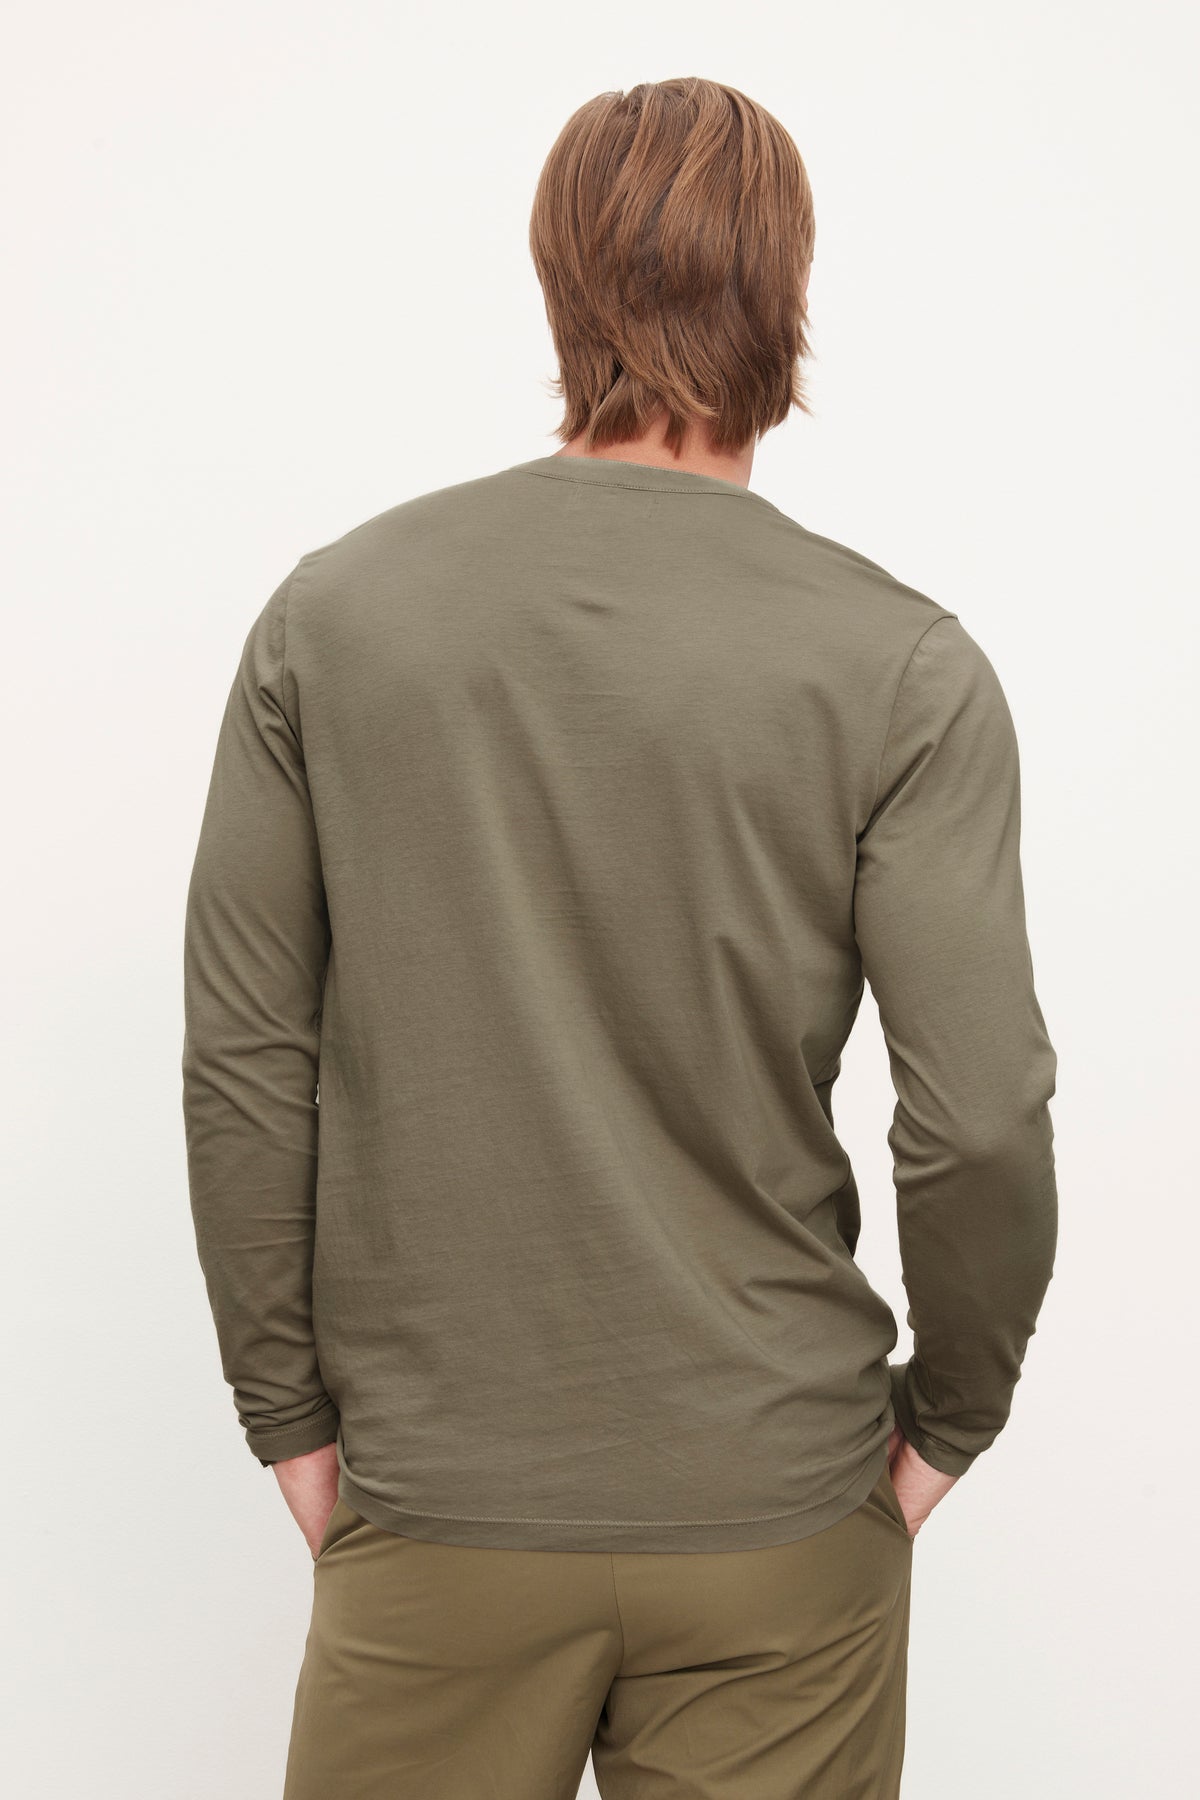 A person with shoulder-length hair wearing an olive green ALVARO HENLEY by Velvet by Graham & Spencer and matching pants is standing with their back facing the camera.-36009056436417